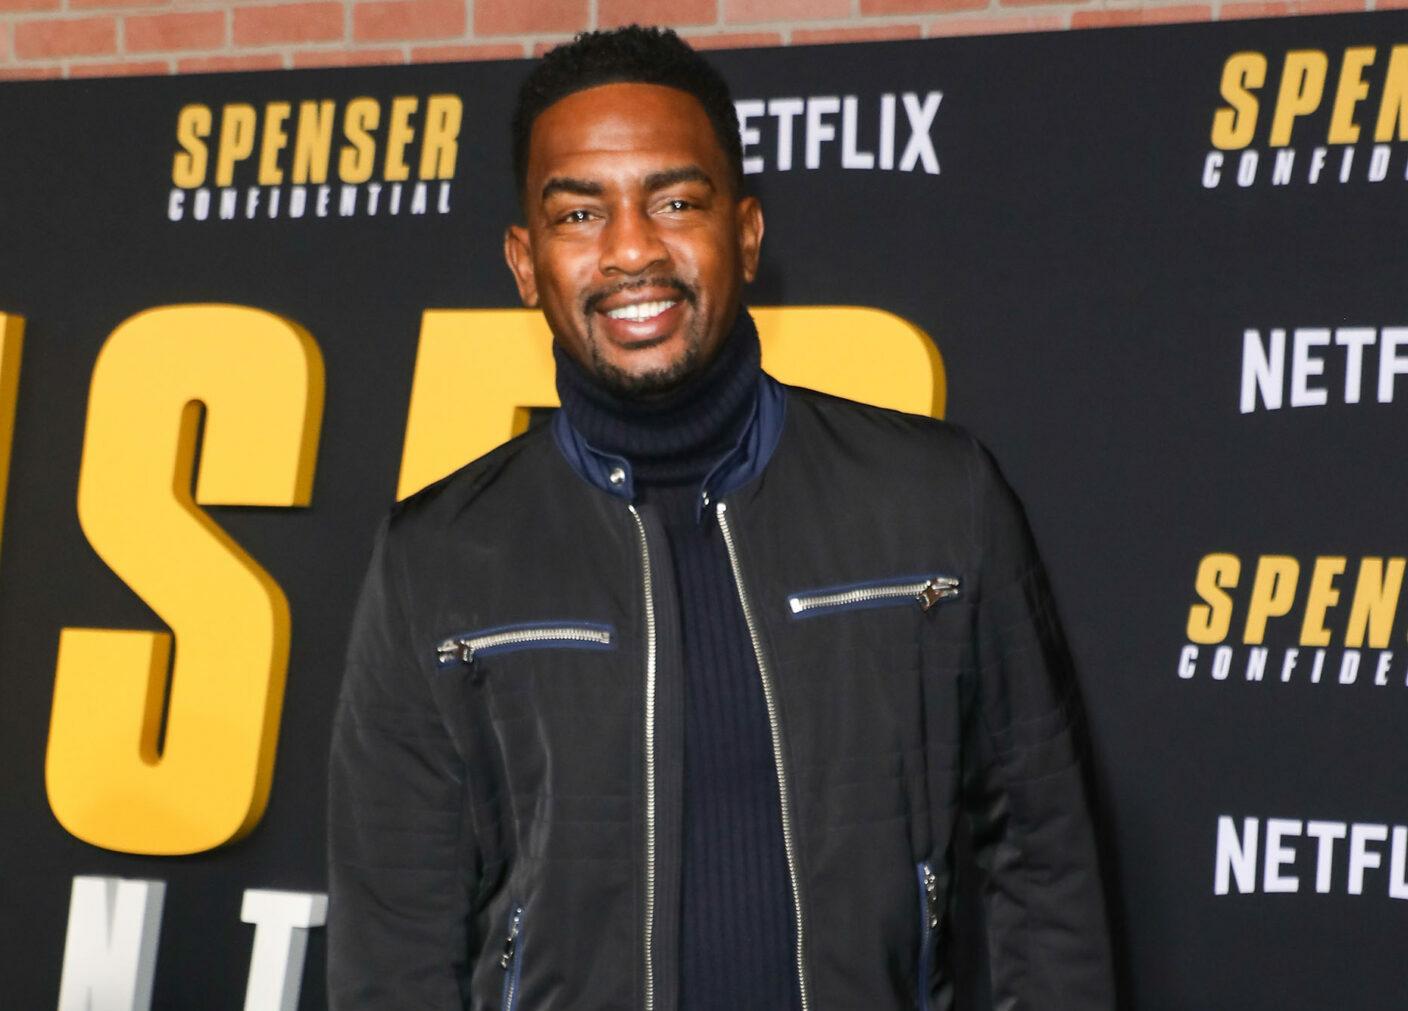 Los Angeles Premiere Of Netflix's 'Spenser Confidential' held at the Regency Village Theatre on February 27, 2020 in Westwood, Los Angeles, California, United States. 27 Feb 2020 Pictured: Bill Bellamy.